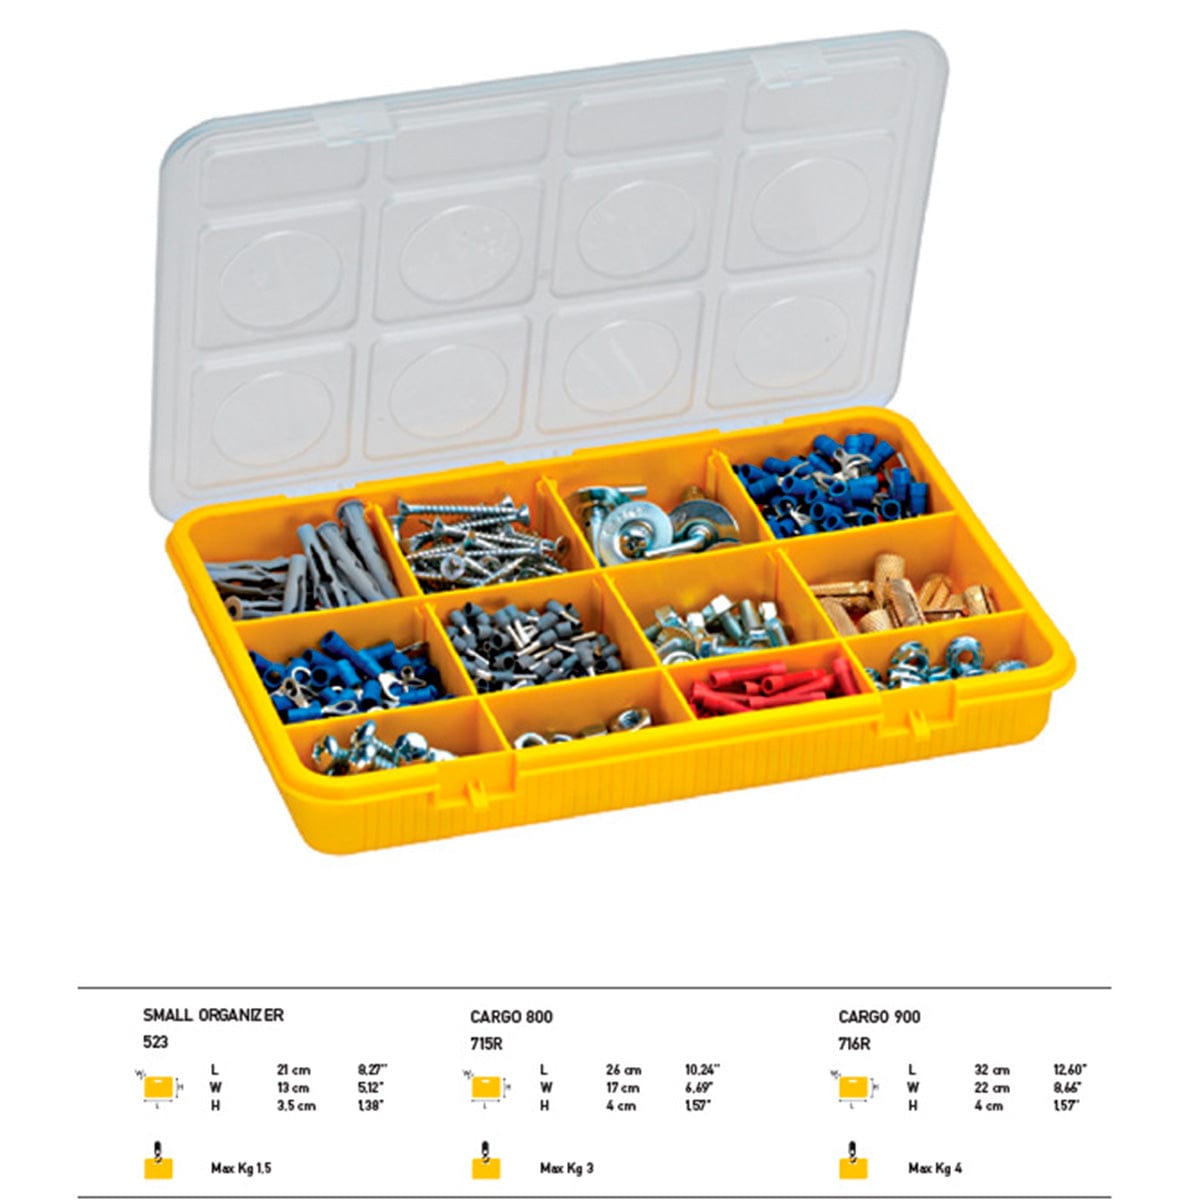 Buy Dimartino Plastic Small Organizer 26x17cm - Cargo 800 | Supply Master Accra, Ghana Tool Boxes Bags & Belts Buy Tools hardware Building materials